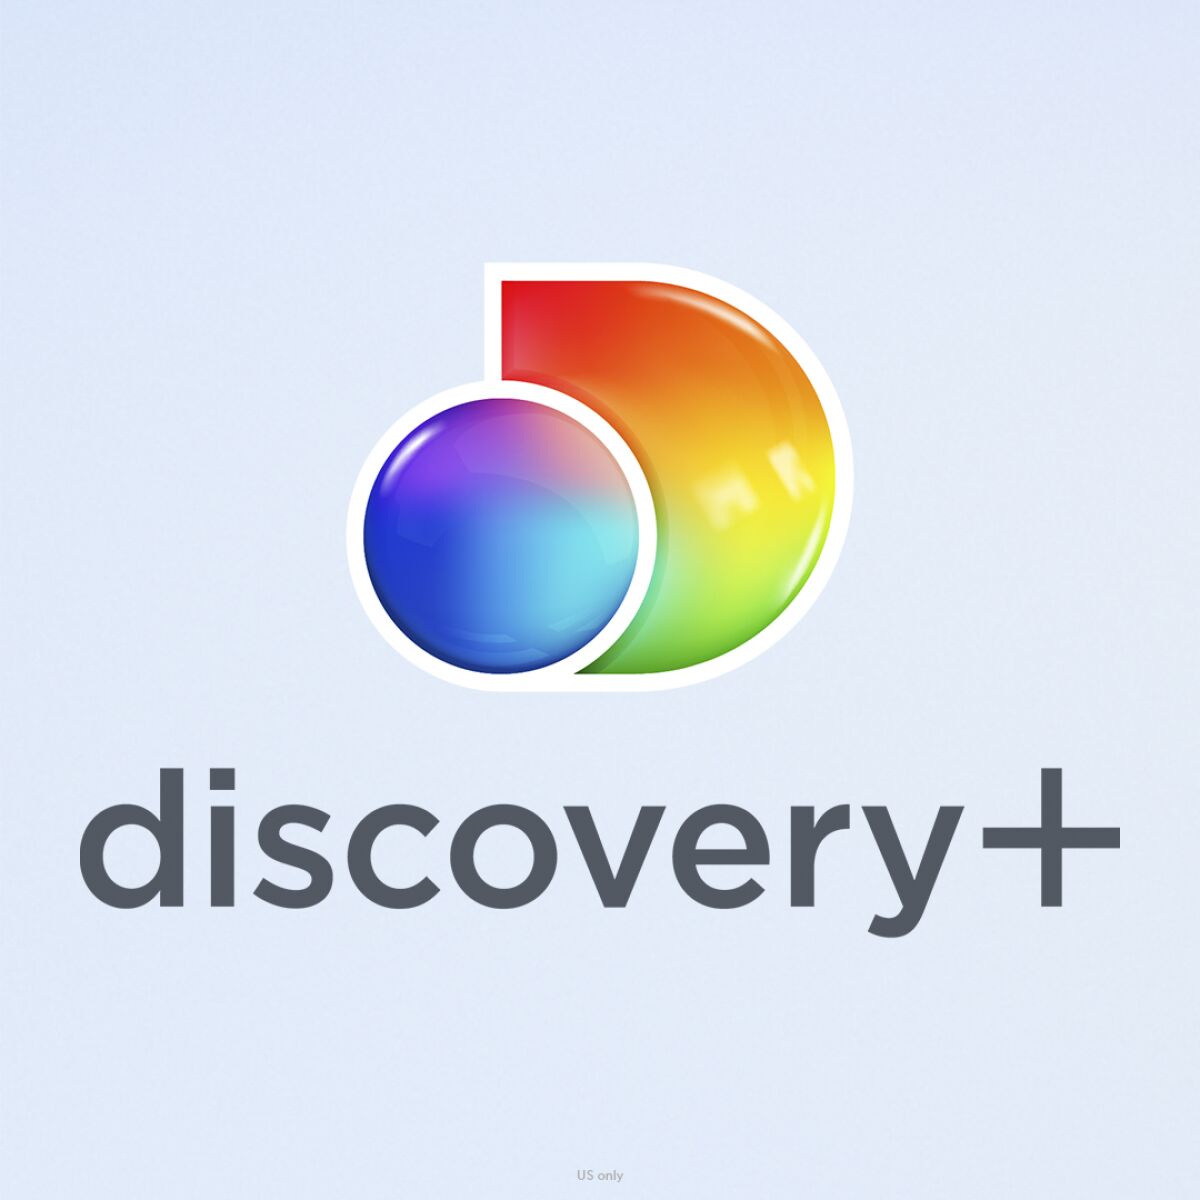 The logo for the discovery+ streaming service